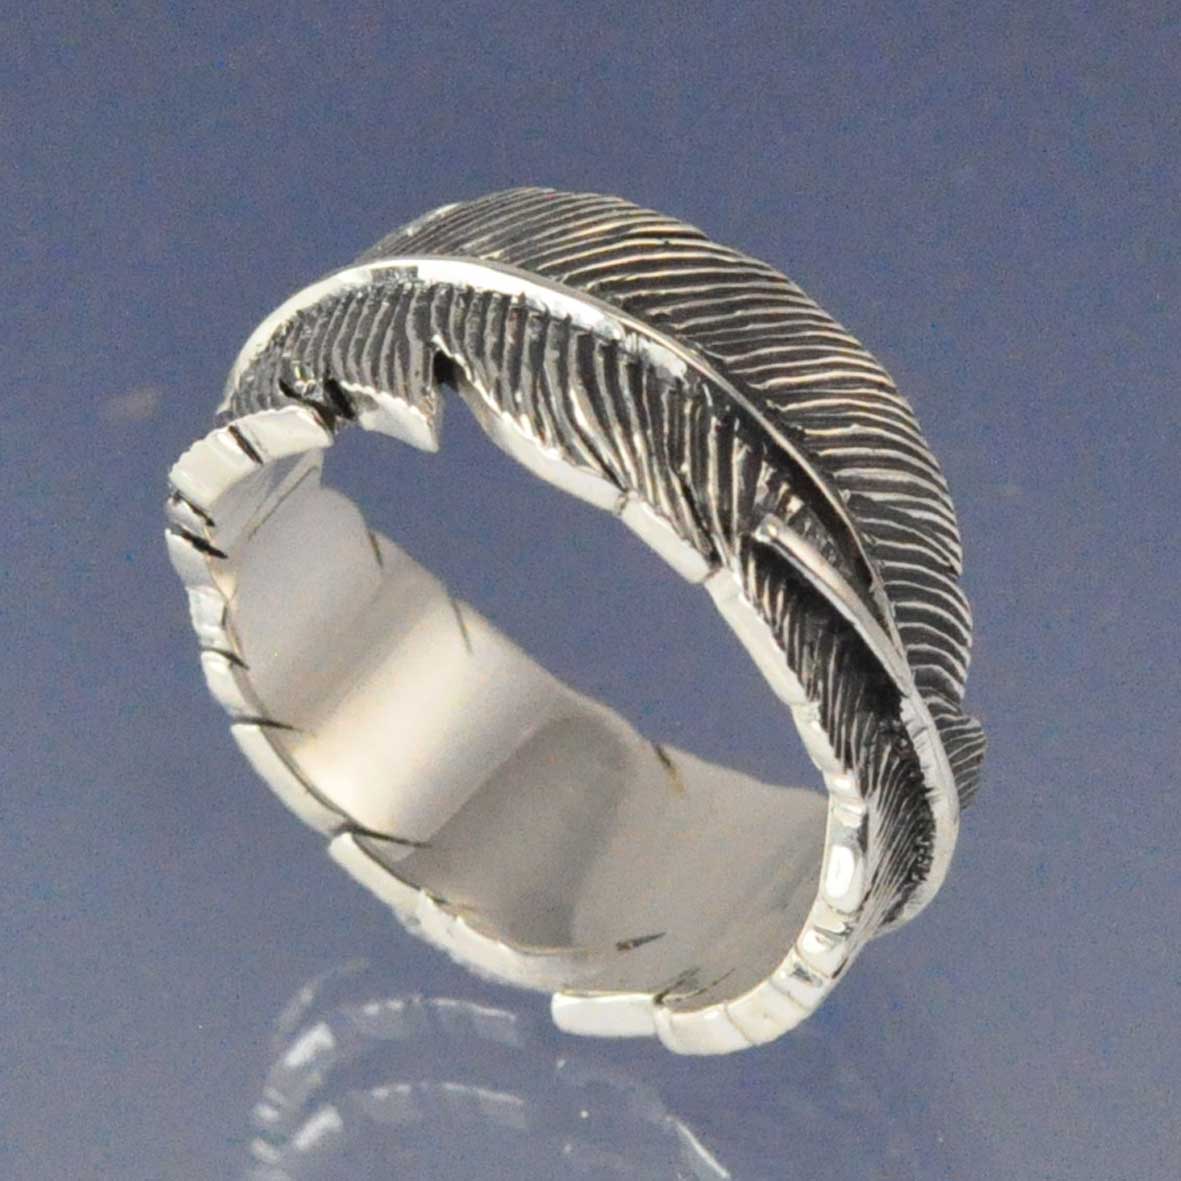 Cremation Ashes Ring - Endless Feather Ring by Chris Parry Jewellery